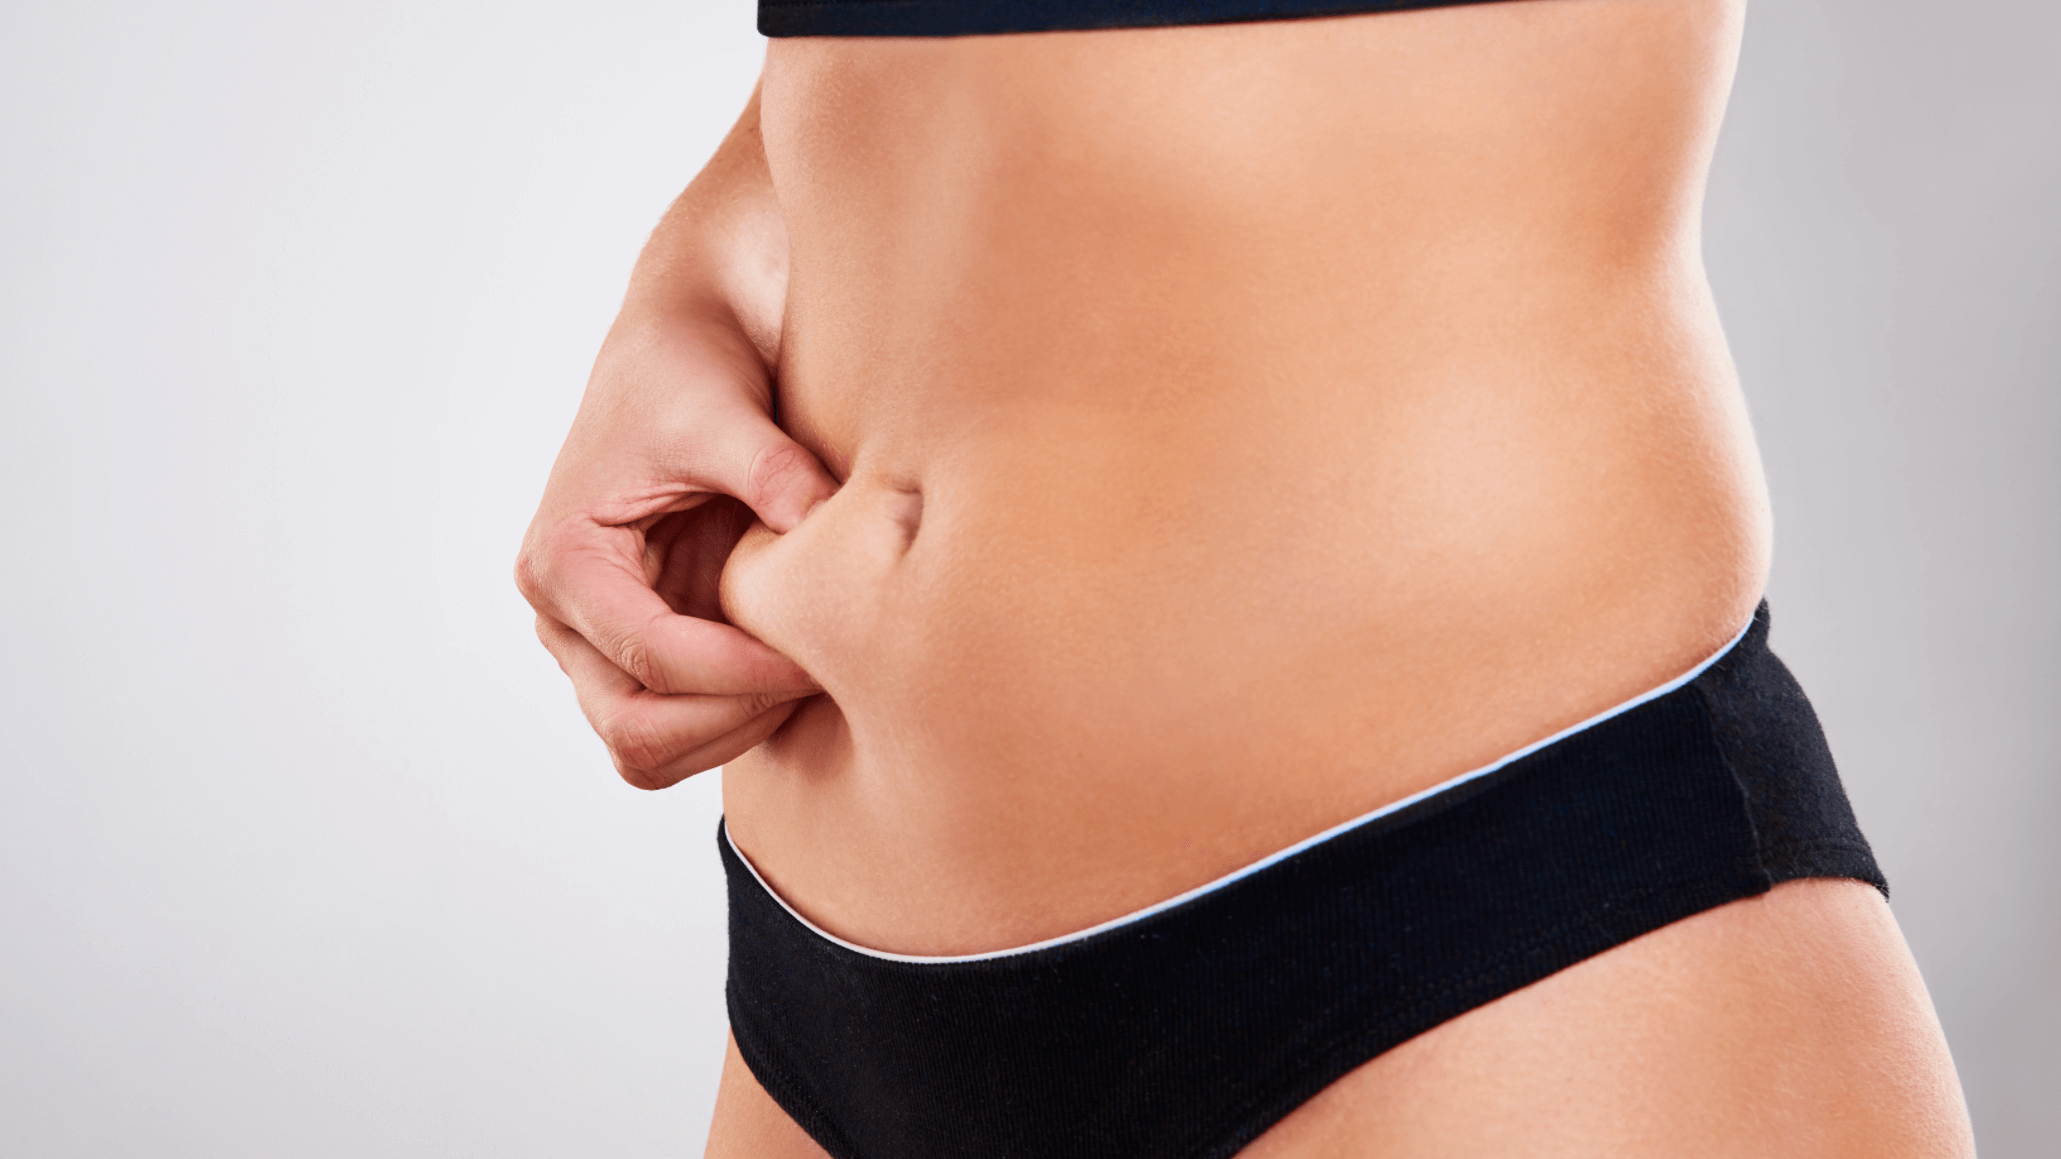 Are You Considering a Tummy Tuck? Here’s What you Need to know!